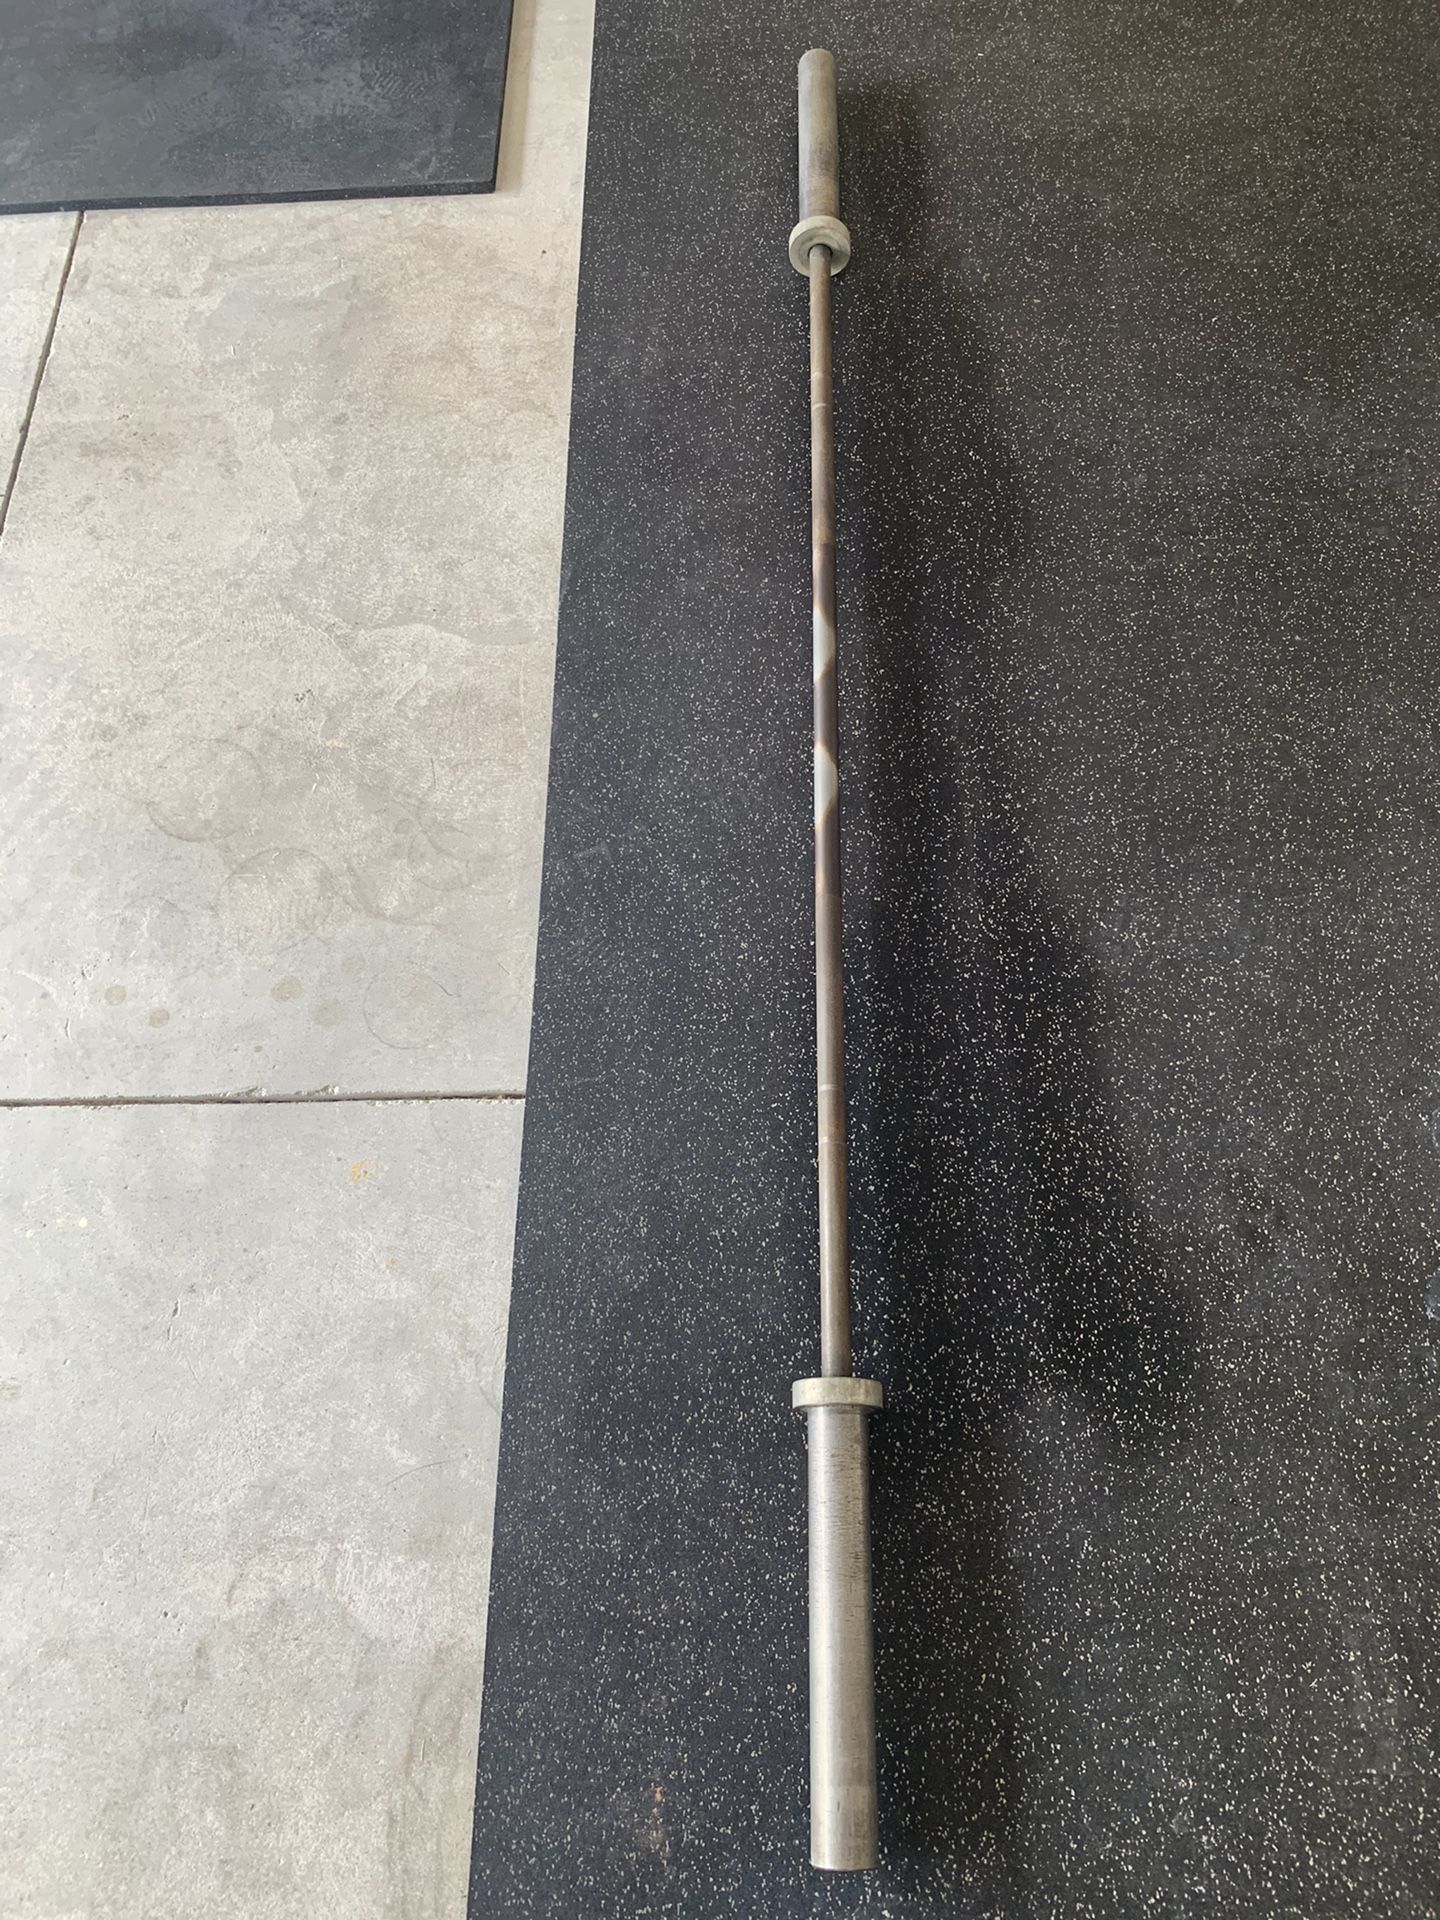 35lb Used Rogue Barbell